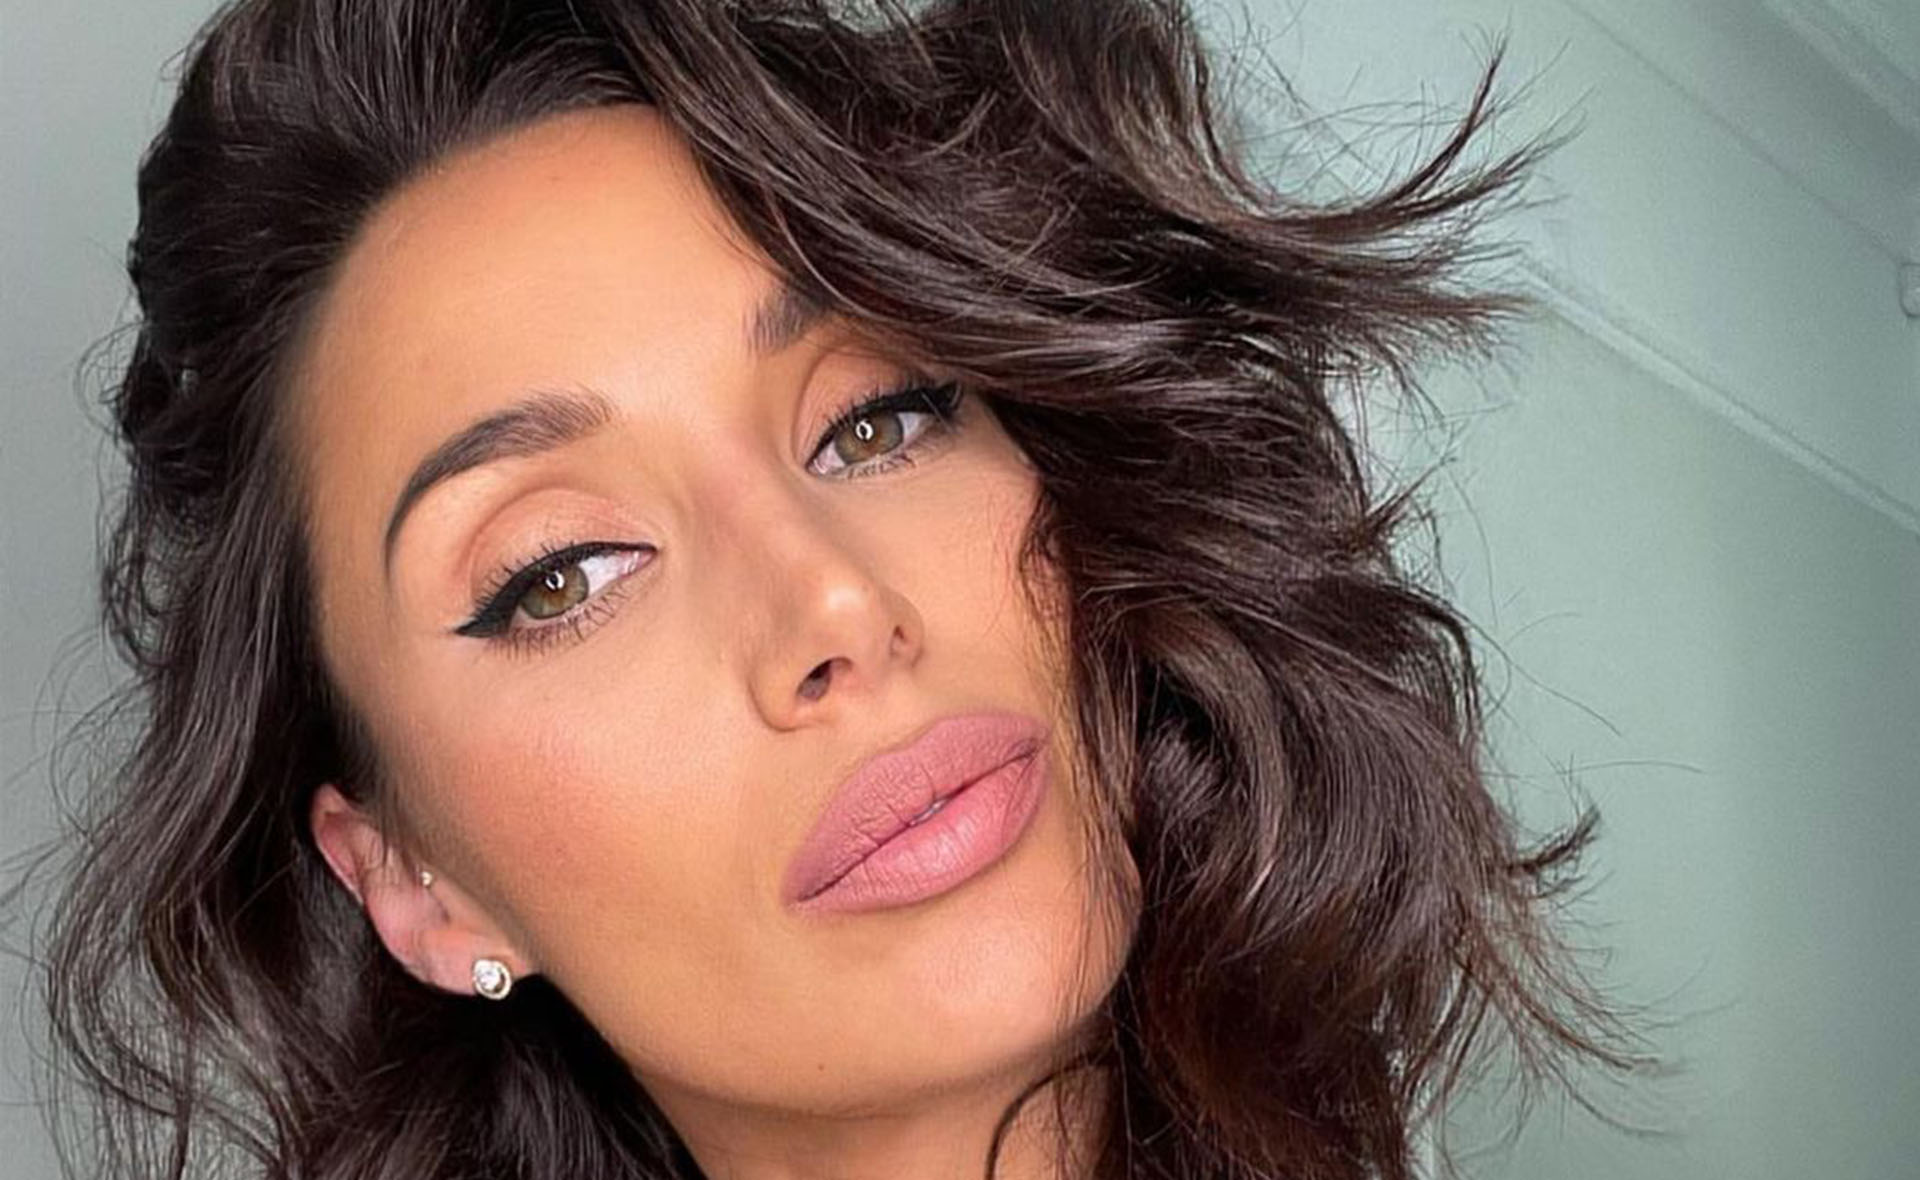 Snezana Wood debuts facial tattoos in surprise video – and the results are impressive